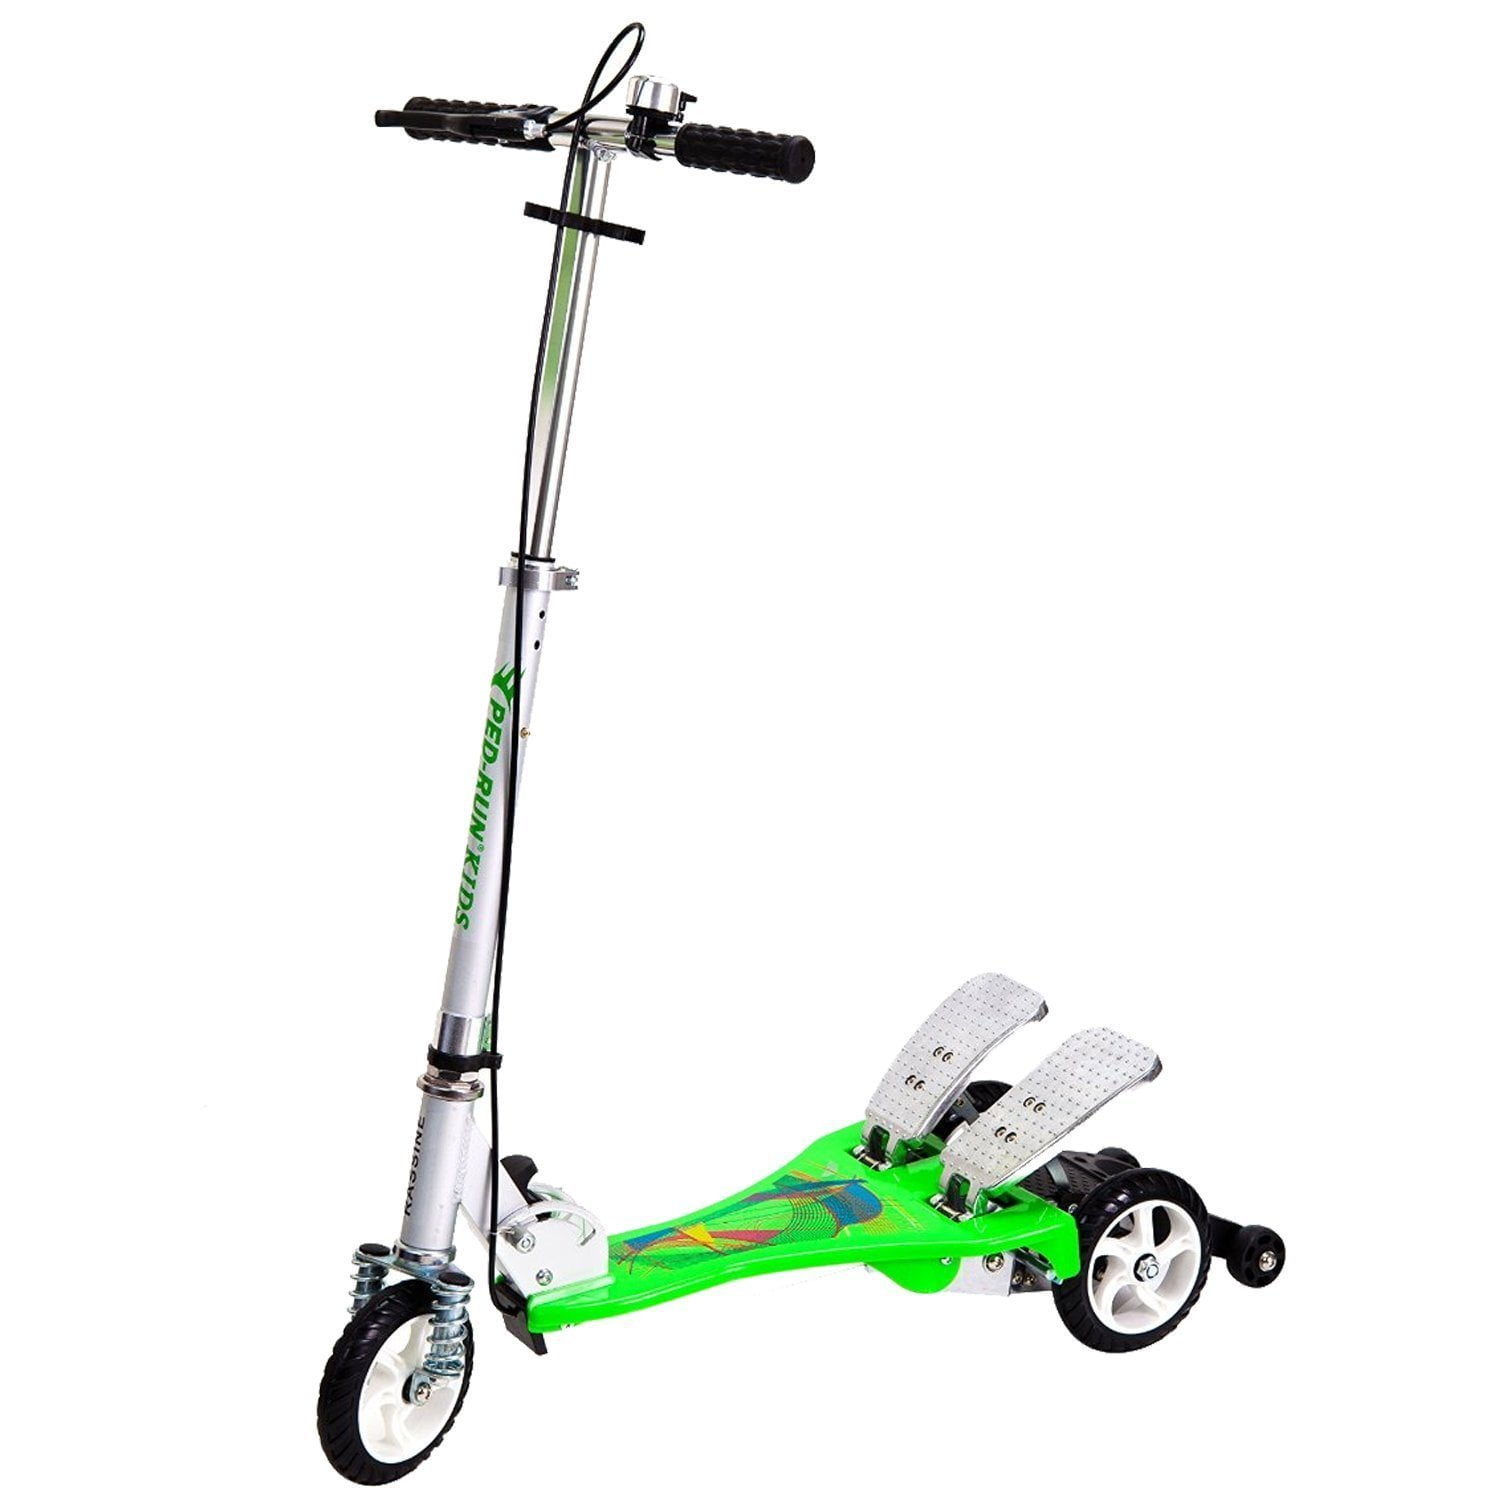 pedal scooter for kids